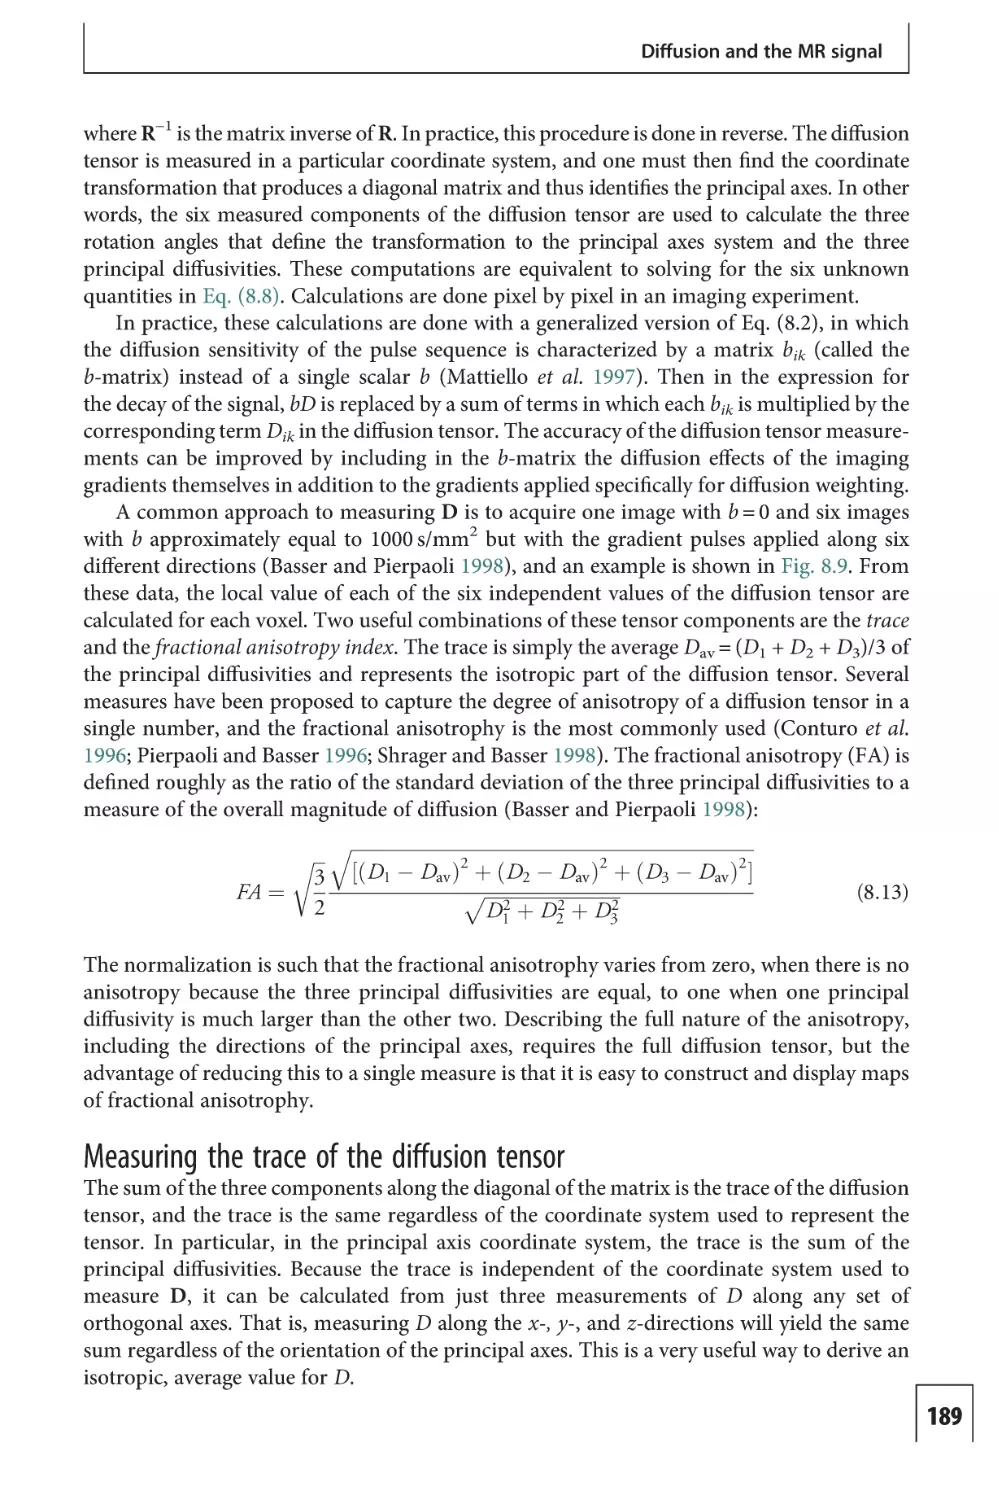 Measuring the trace of the diffusion tensor